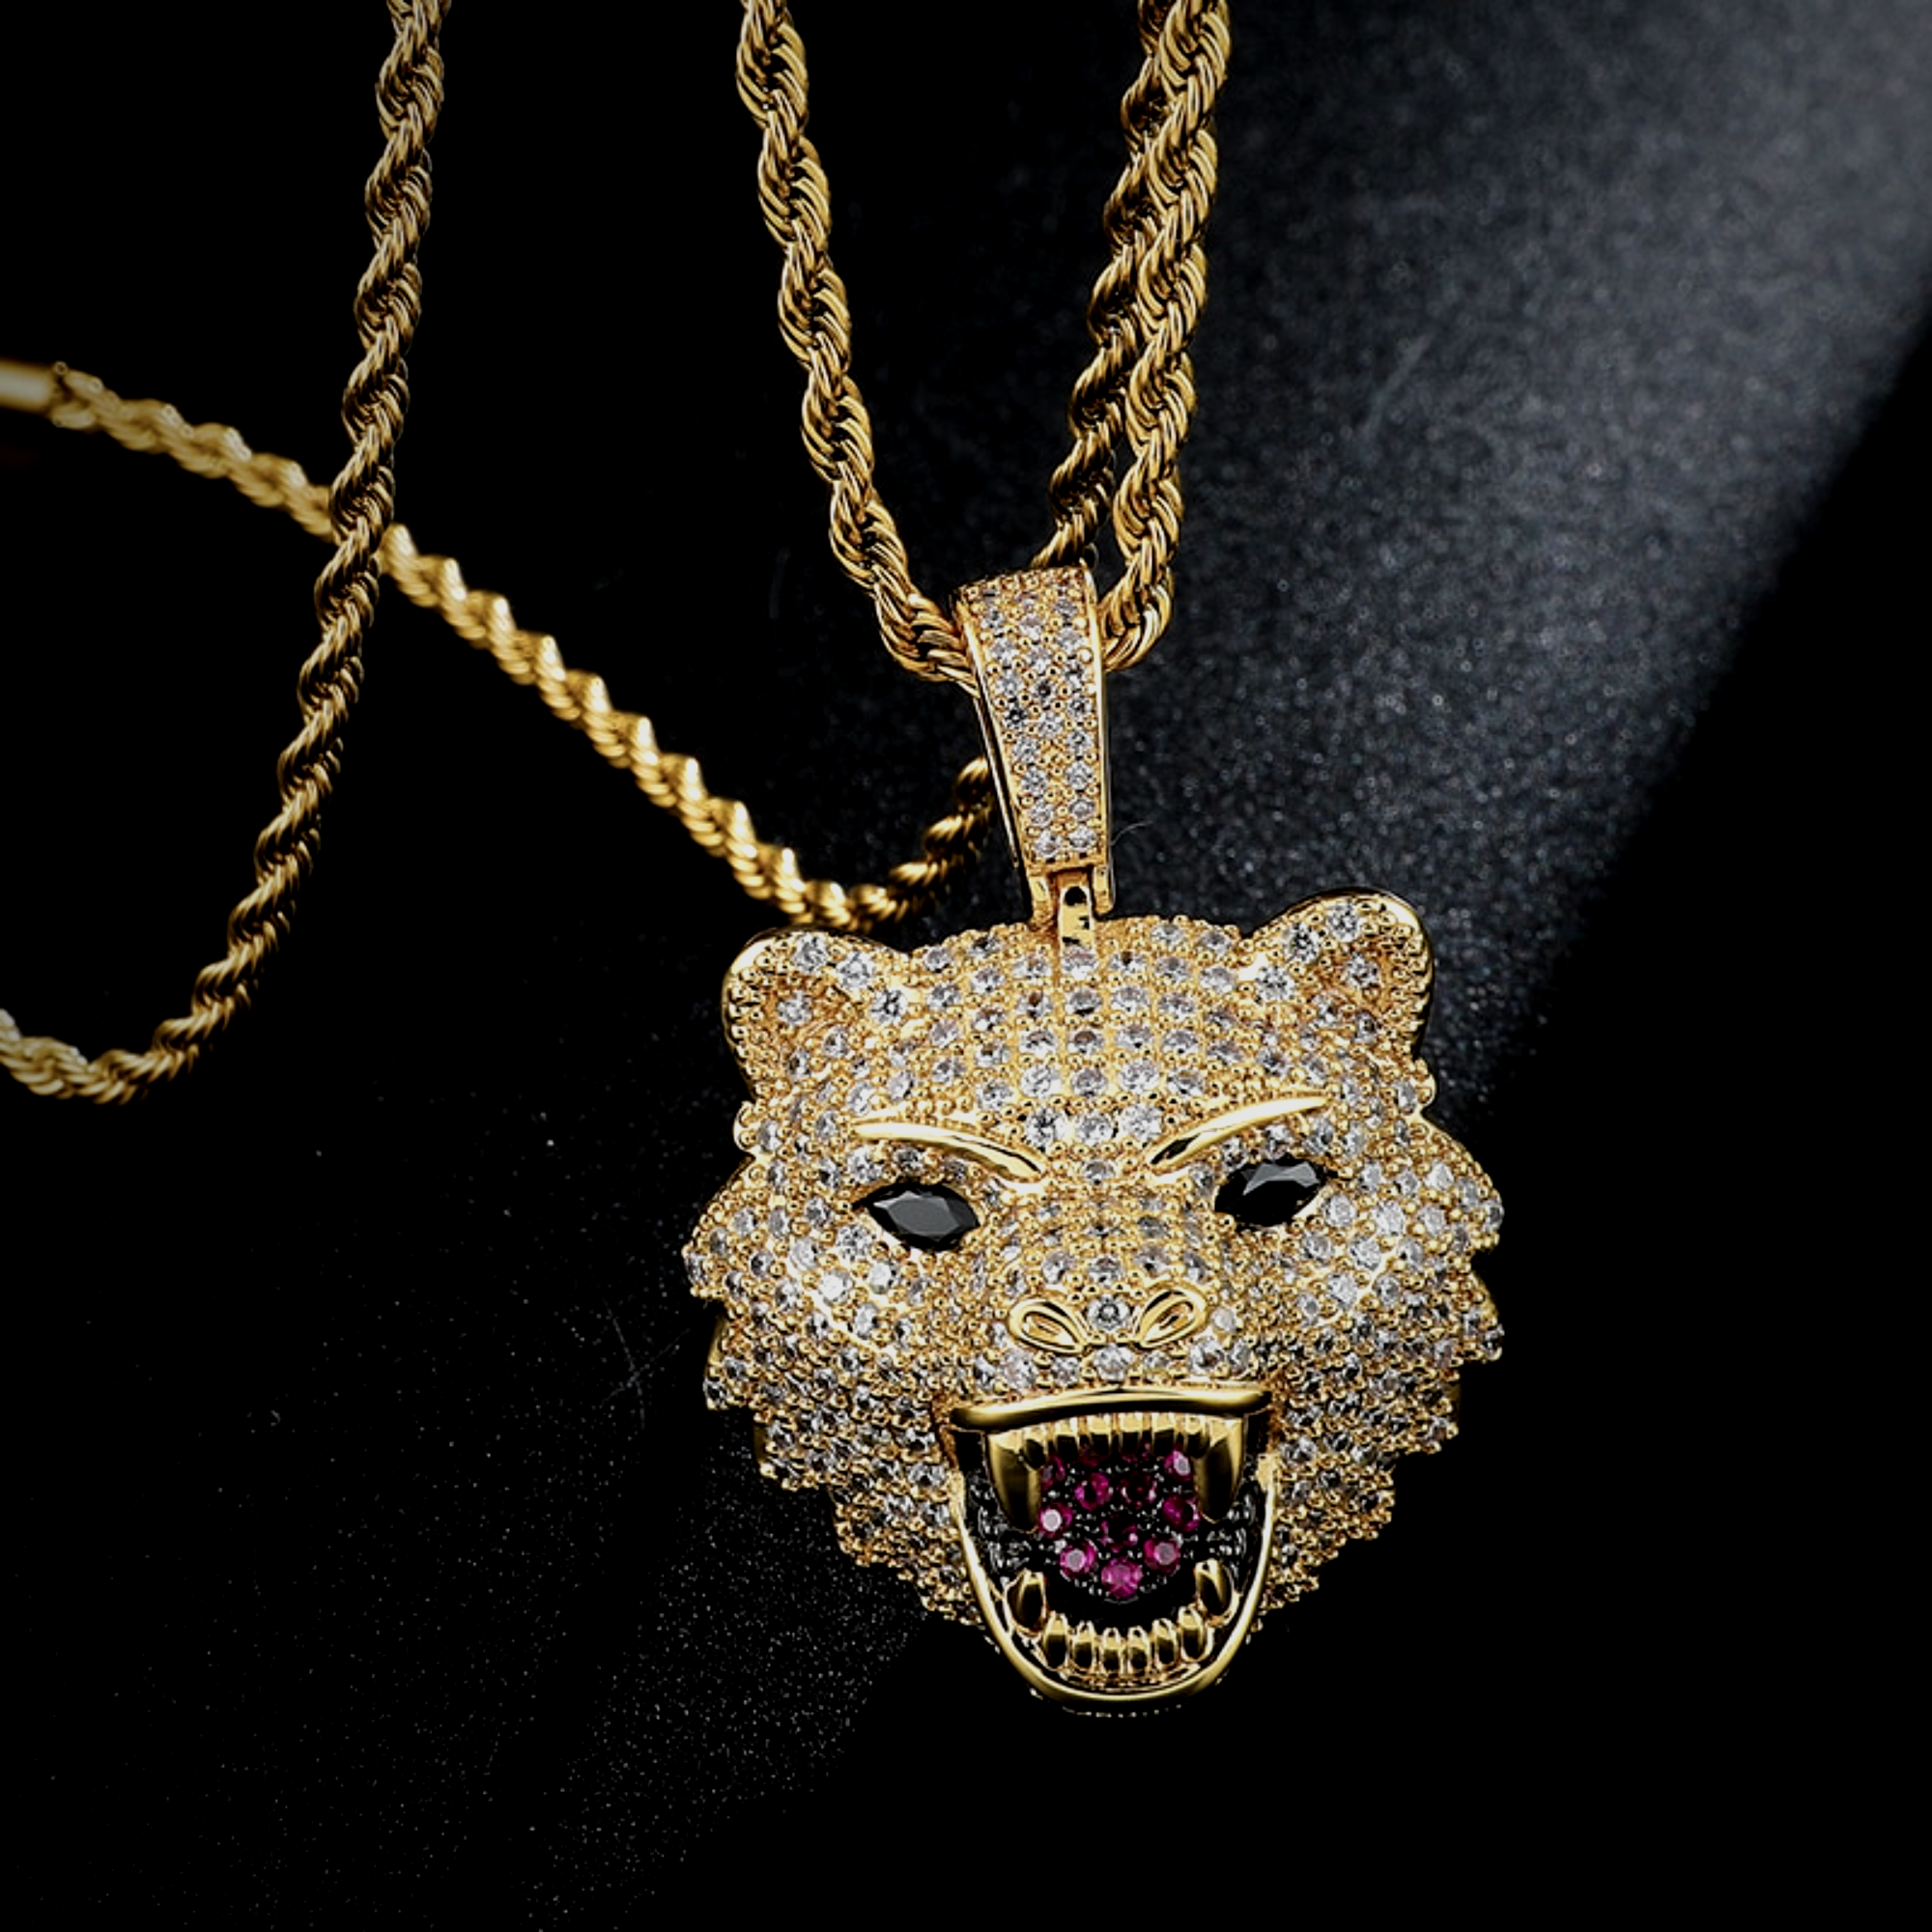 Details about  / Mens Stainless Steel Tiger Head Pendant 4mm Box Link Chain Necklace #N195